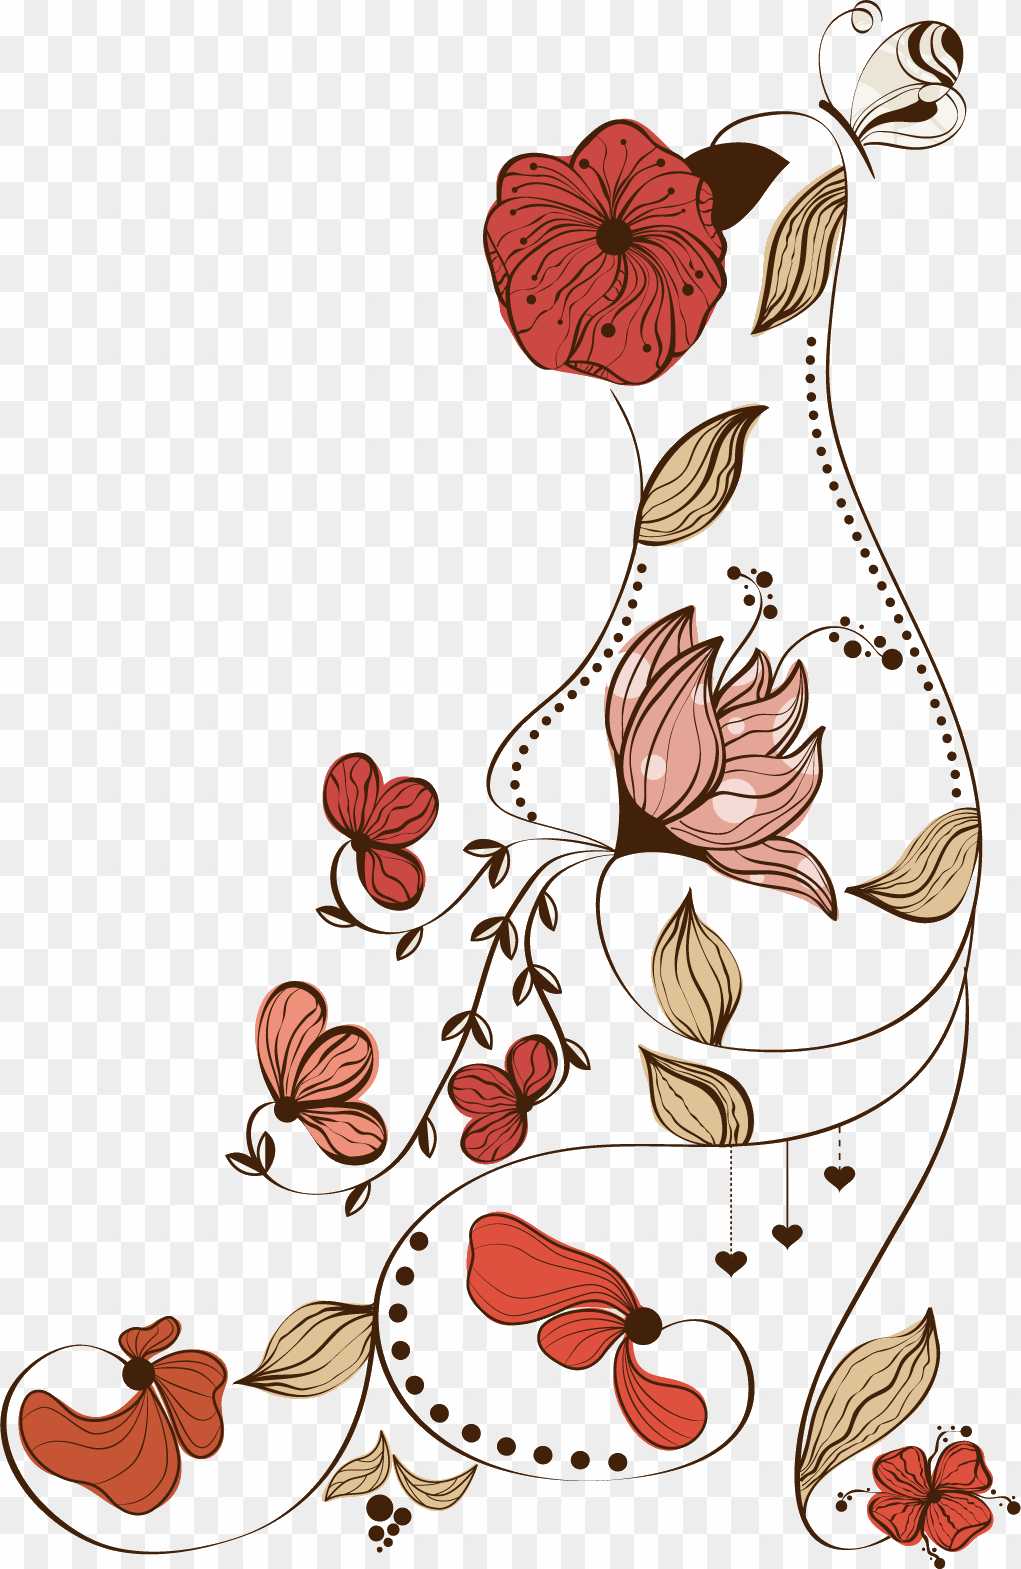 Flower editing png